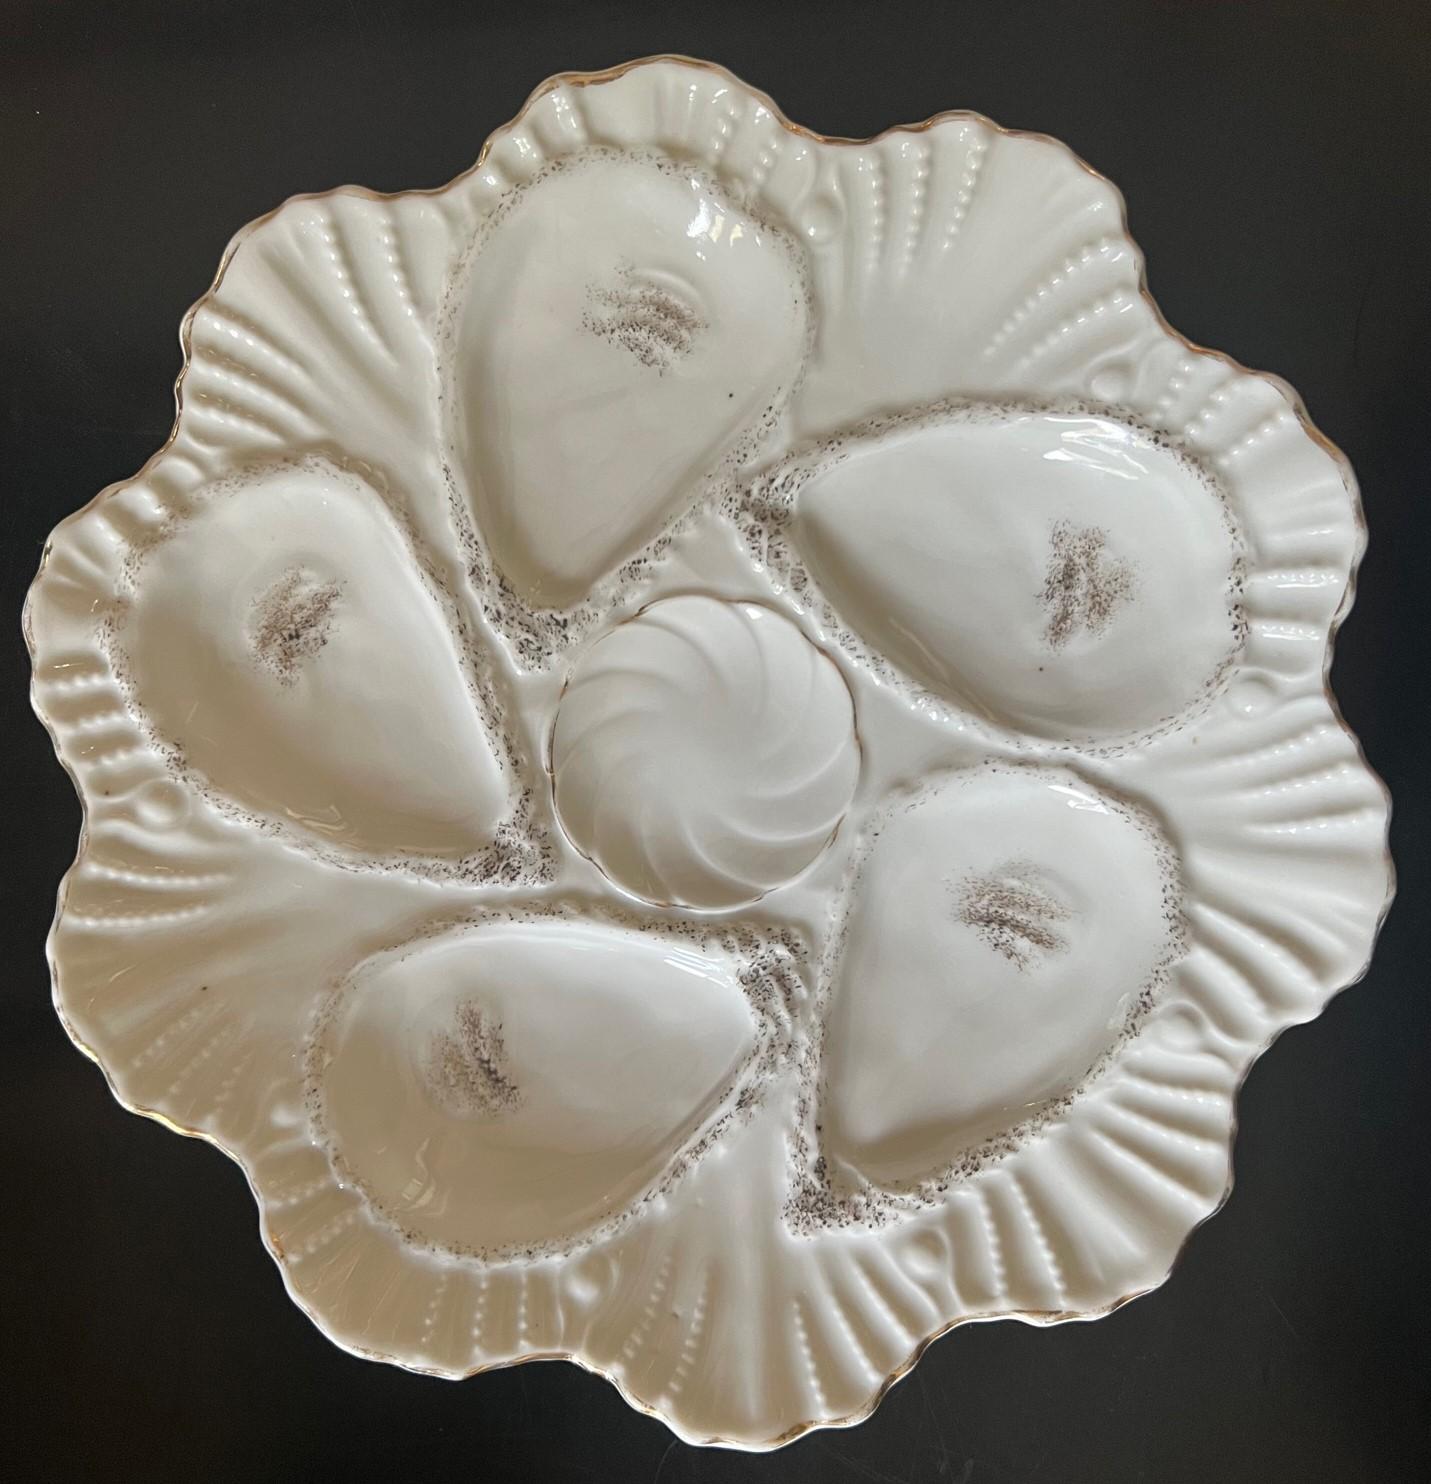 Antique oyster plates made in Germany in the mid to late 1800's. The plate has five wells with a center well for lemons, They all have an impressed Registrirt mark on the back as well as a hand painted number.